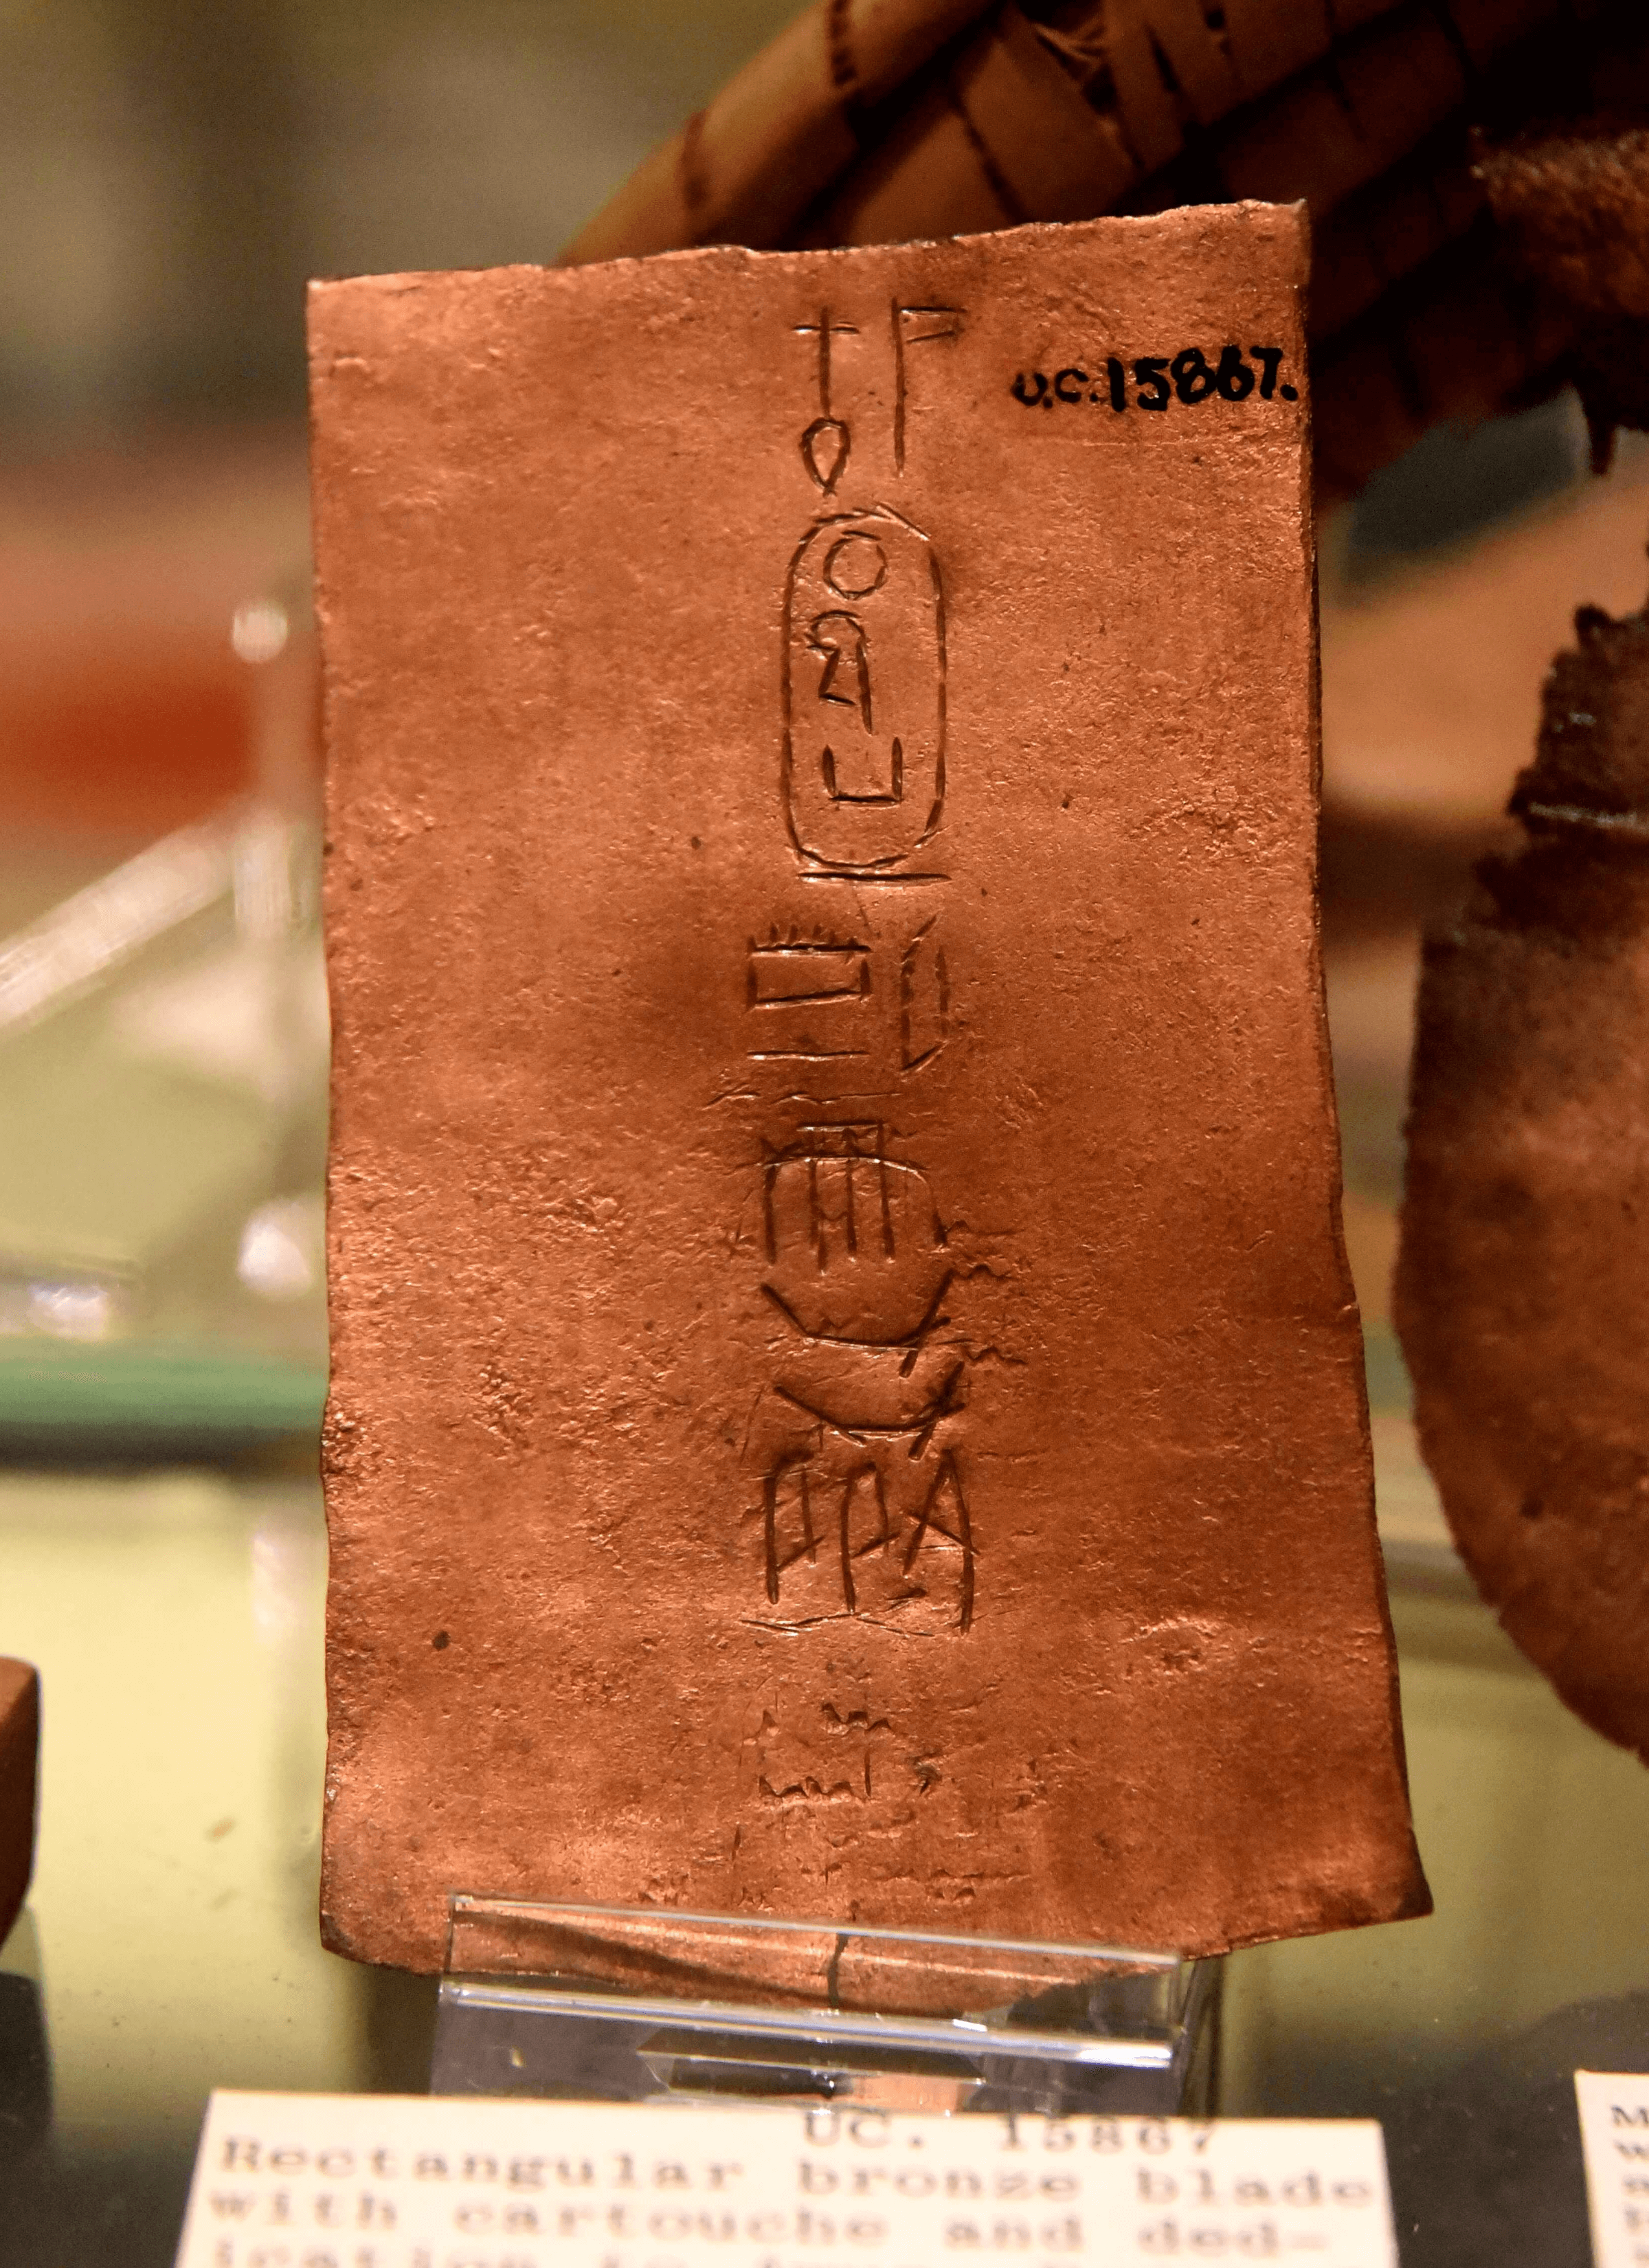 Copper or bronze sheet bearing the name of Hatshepsut. From a foundation deposit in "a small pit covered with a mat" found at Deir el-Bahri, Egypt. 18th Dynasty. The Petrie Museum of Egyptian Archaeology, London.